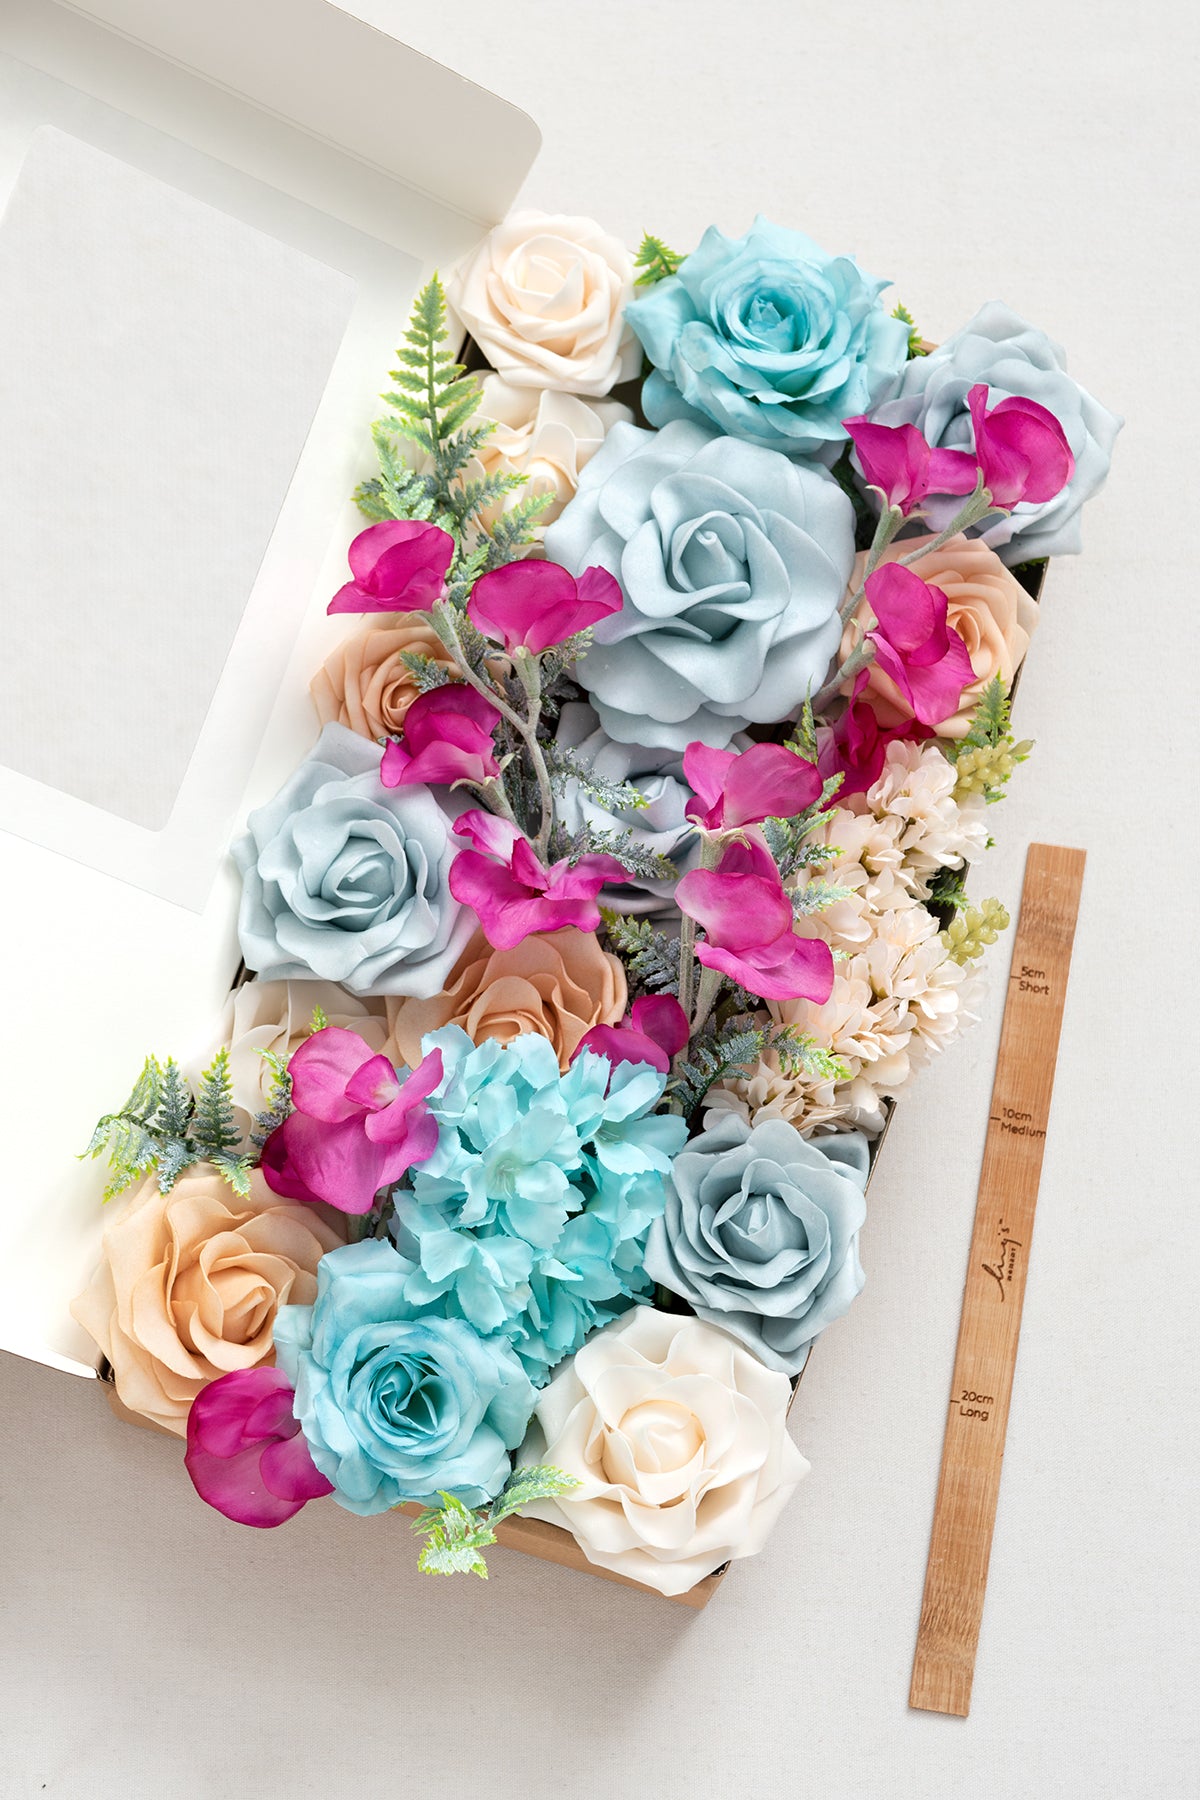 DIY Kits For Centerpieces in Blue Colors